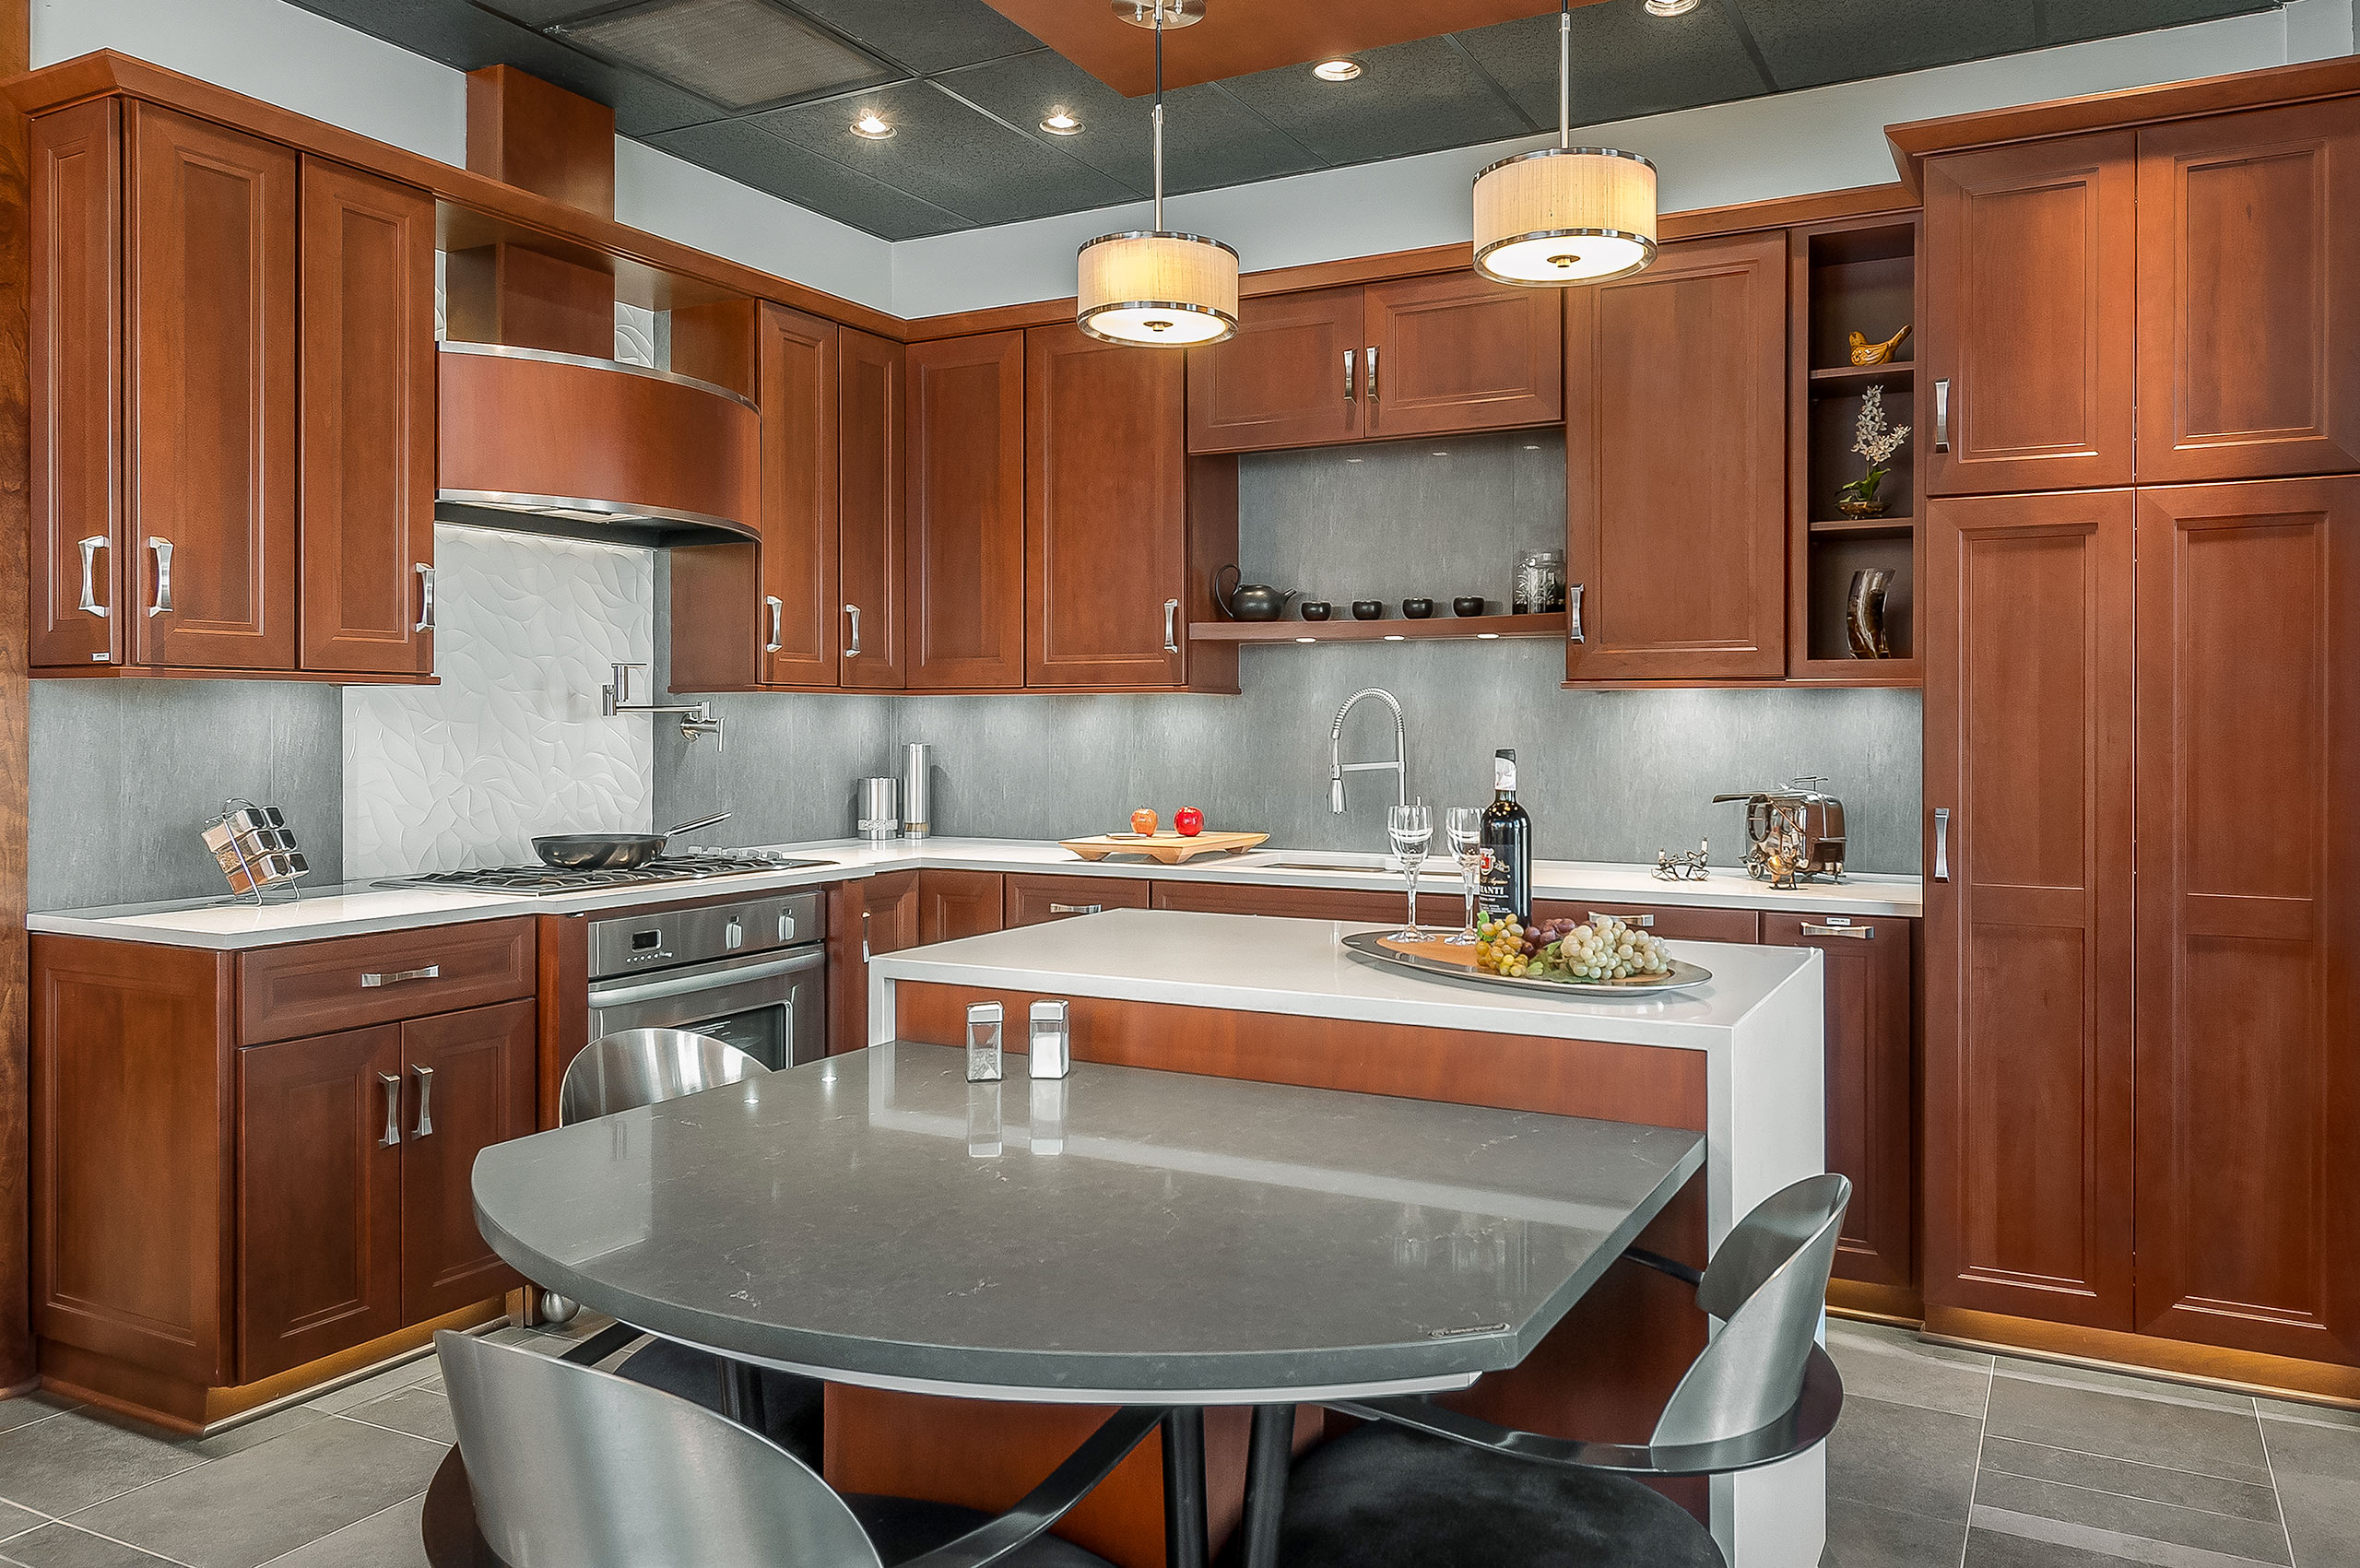 Upscale cherry and gray kitchen with stainless appliances.